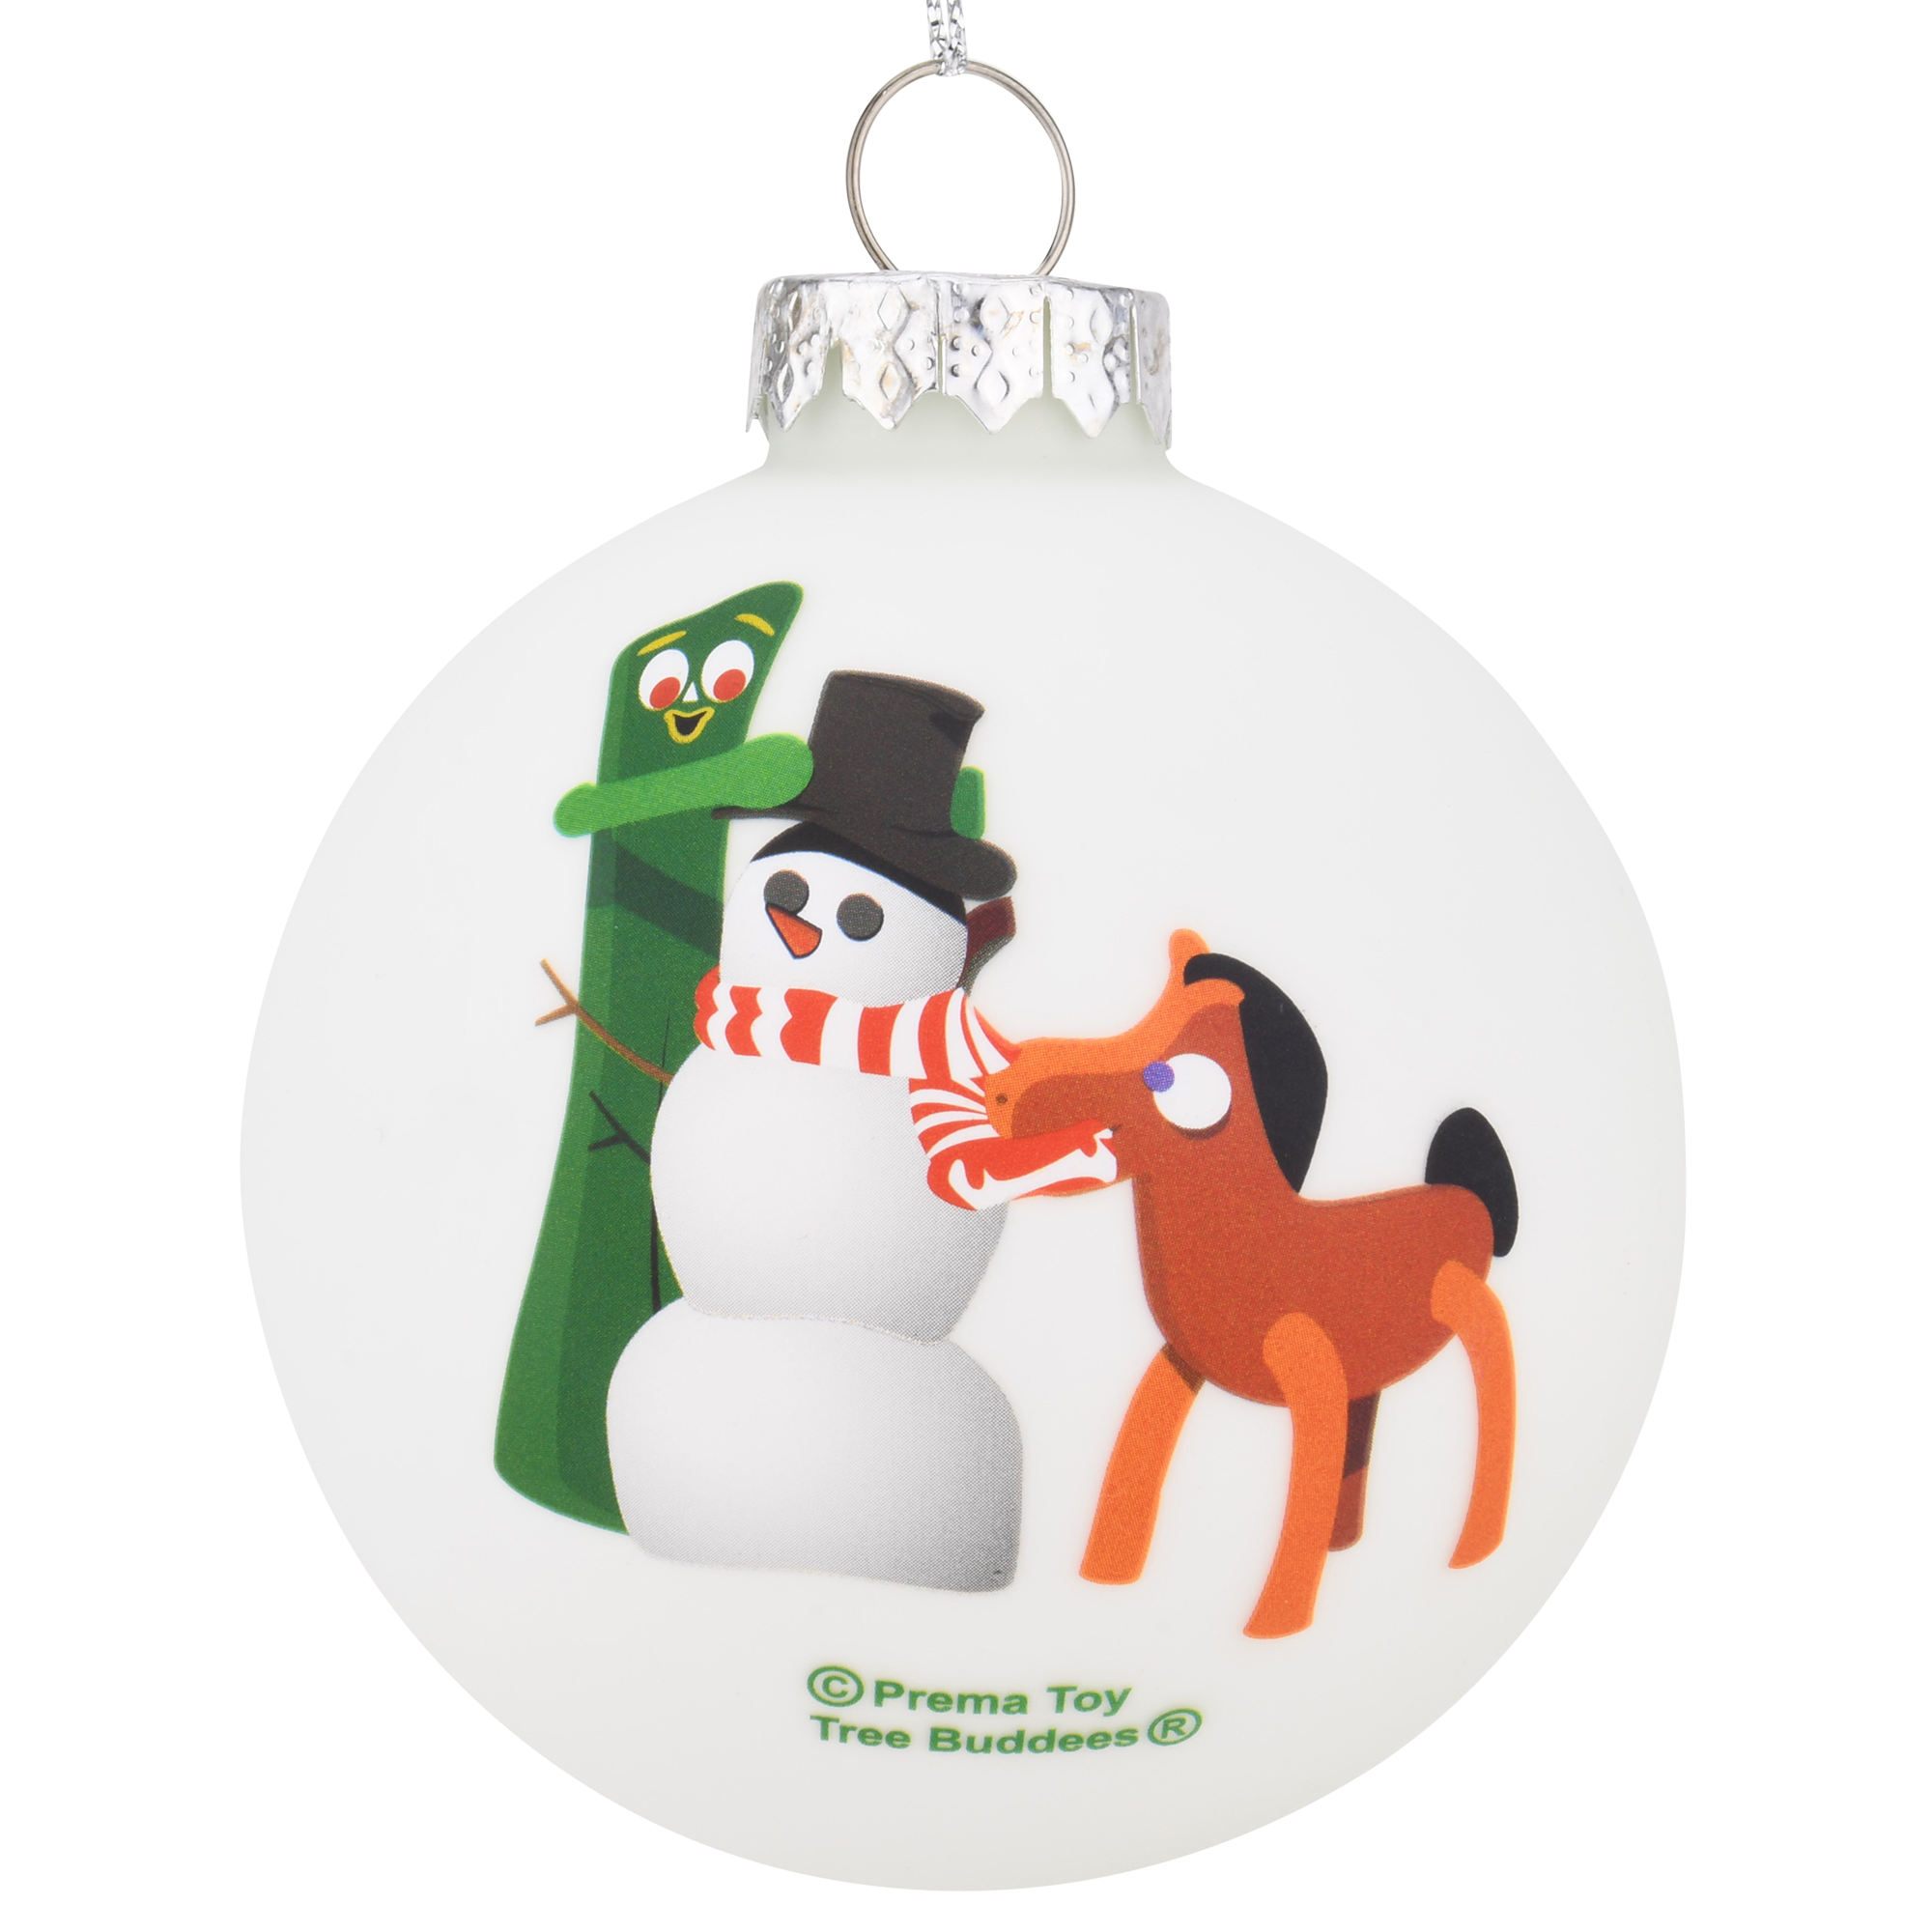 Gumby Christmas ornaments